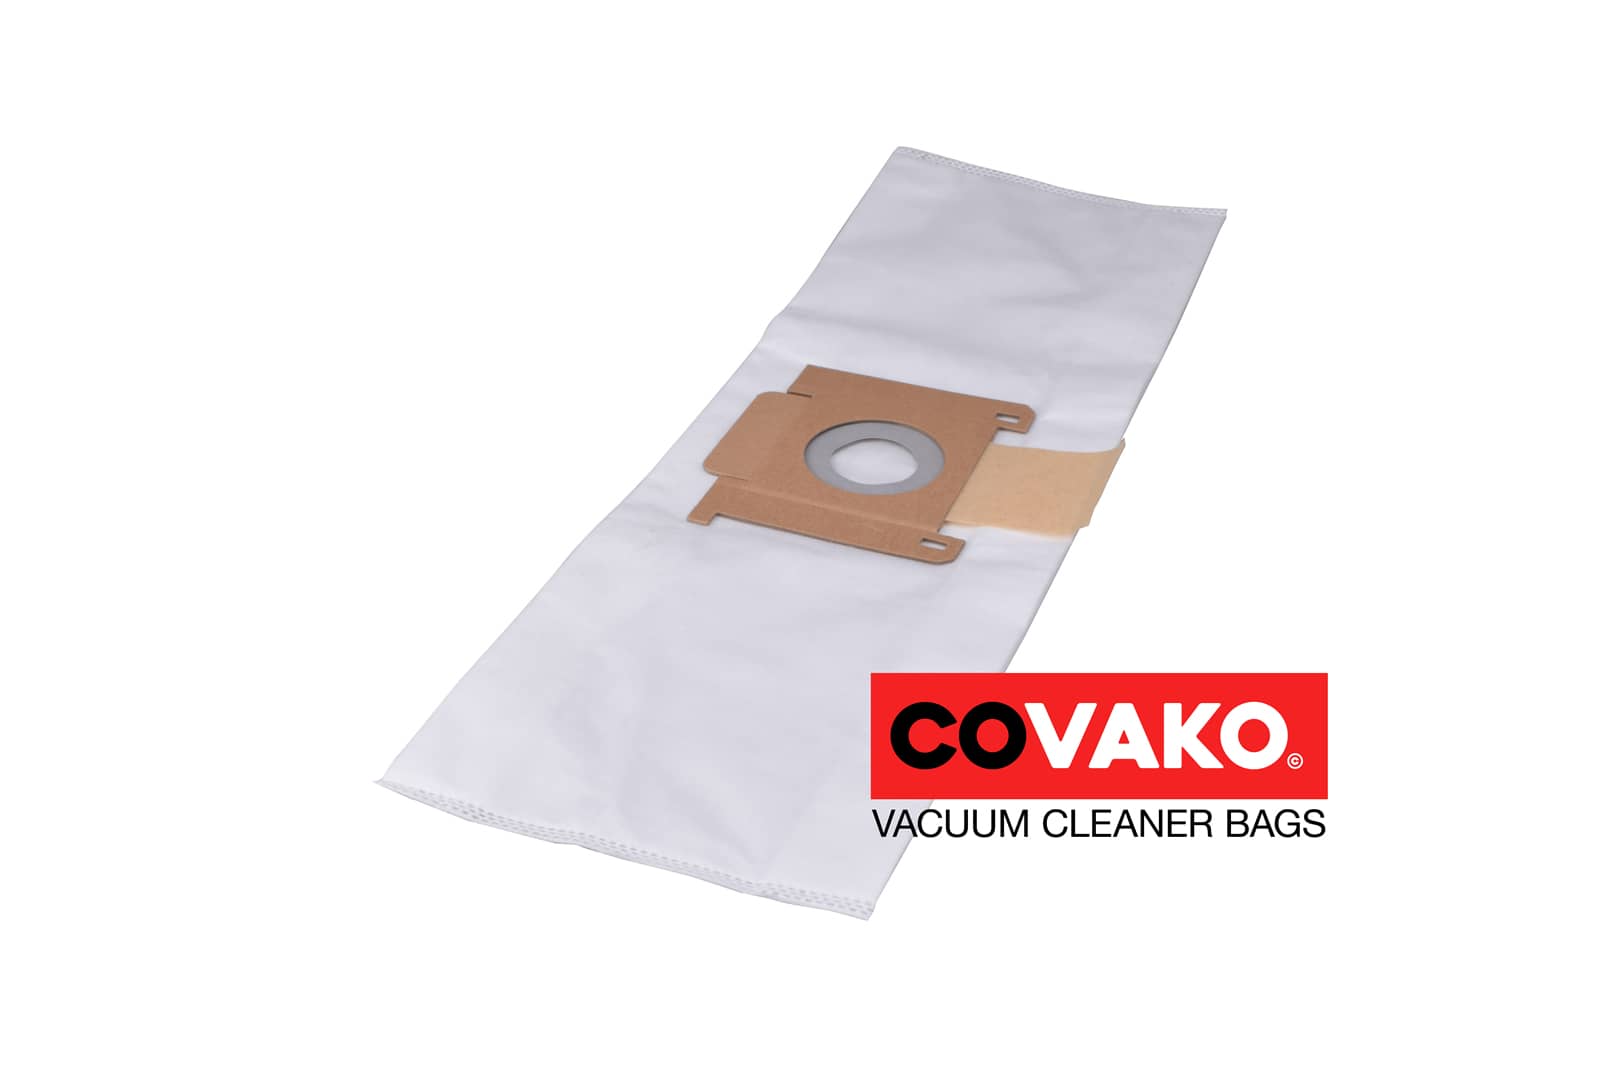 Fast Compacto 6 / Synthesis - Fast vacuum cleaner bags